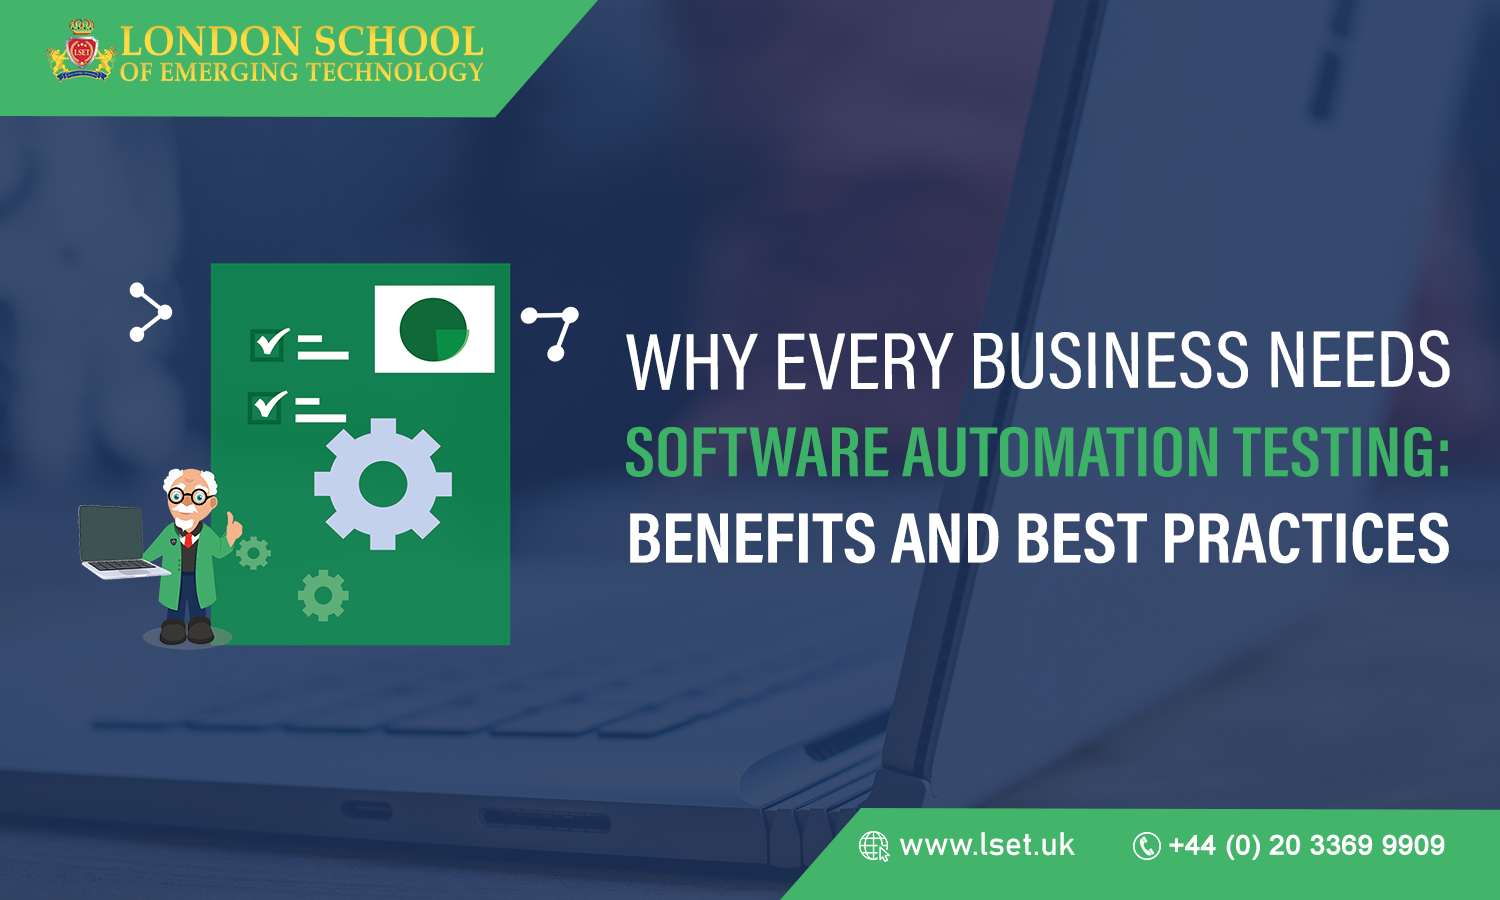 Why Every Business Needs Software Automation Testing Benefits and Best Practices